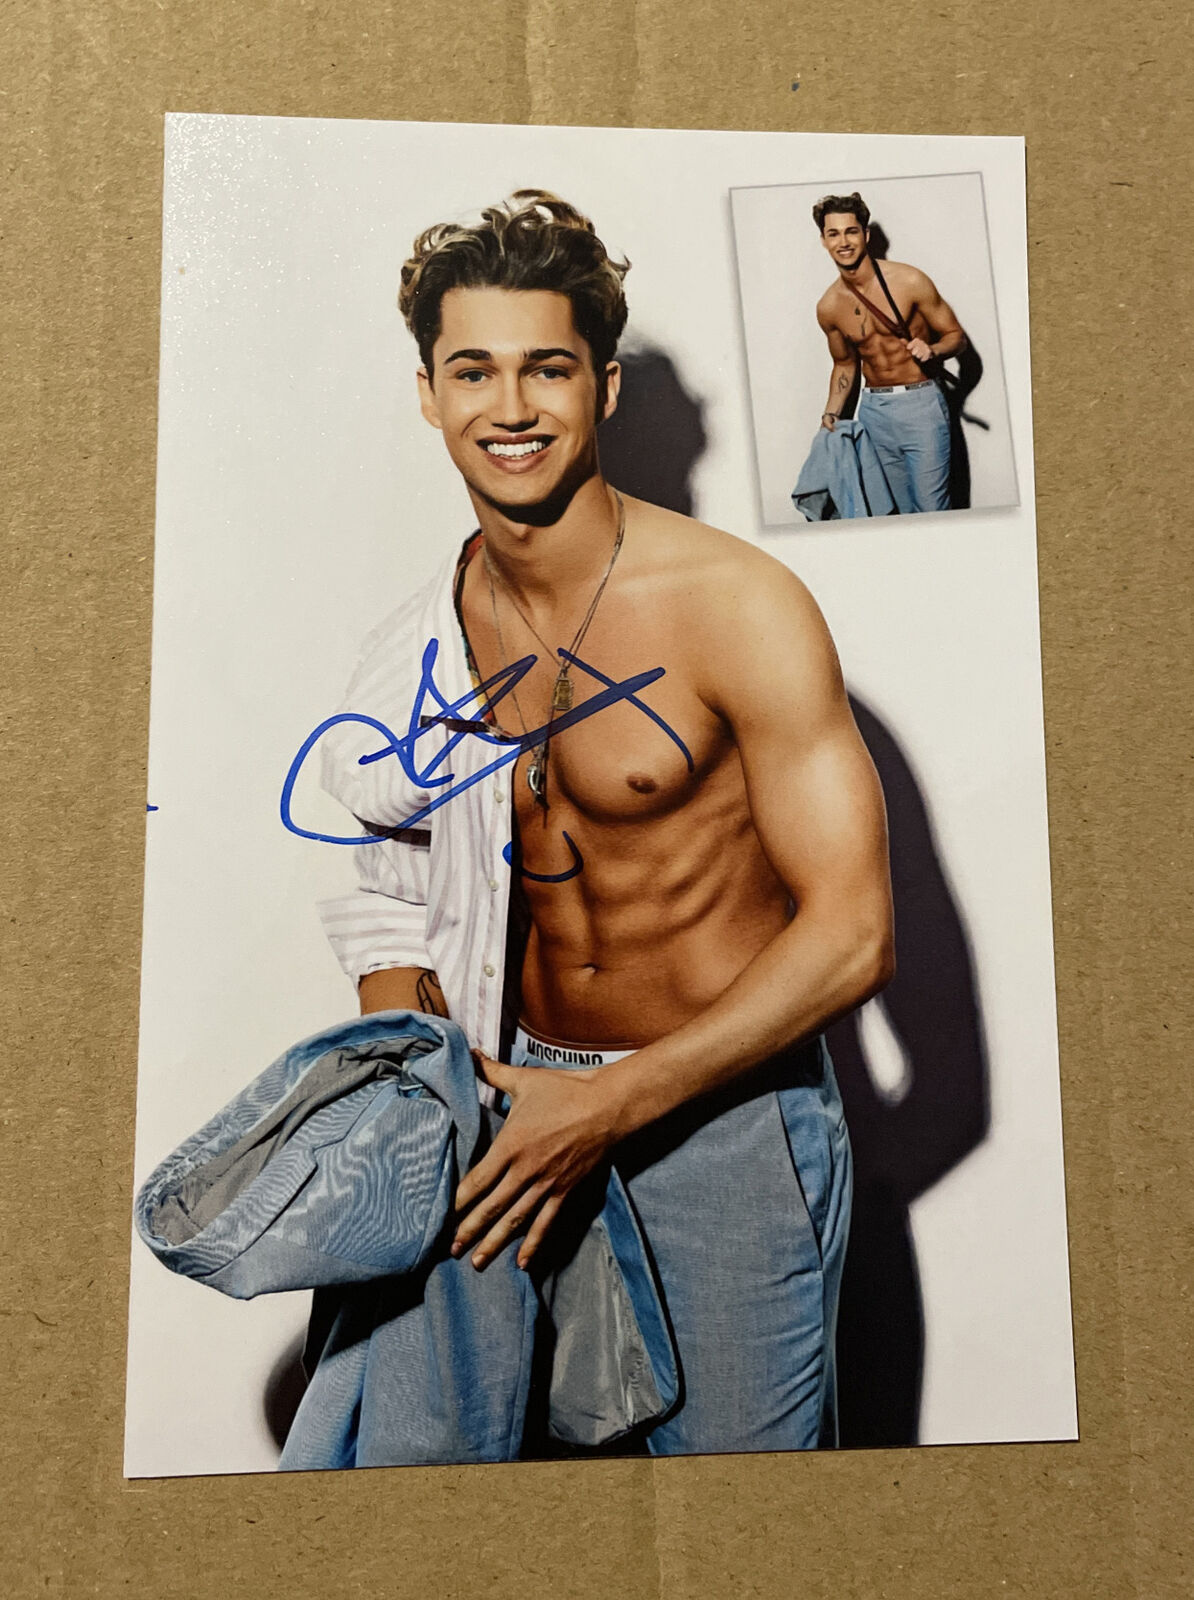 STRICTLY COME DANCING AJ PRITCHARD SIGNED 6x4 Autograph Photo Poster painting Dancer Hollyoaks